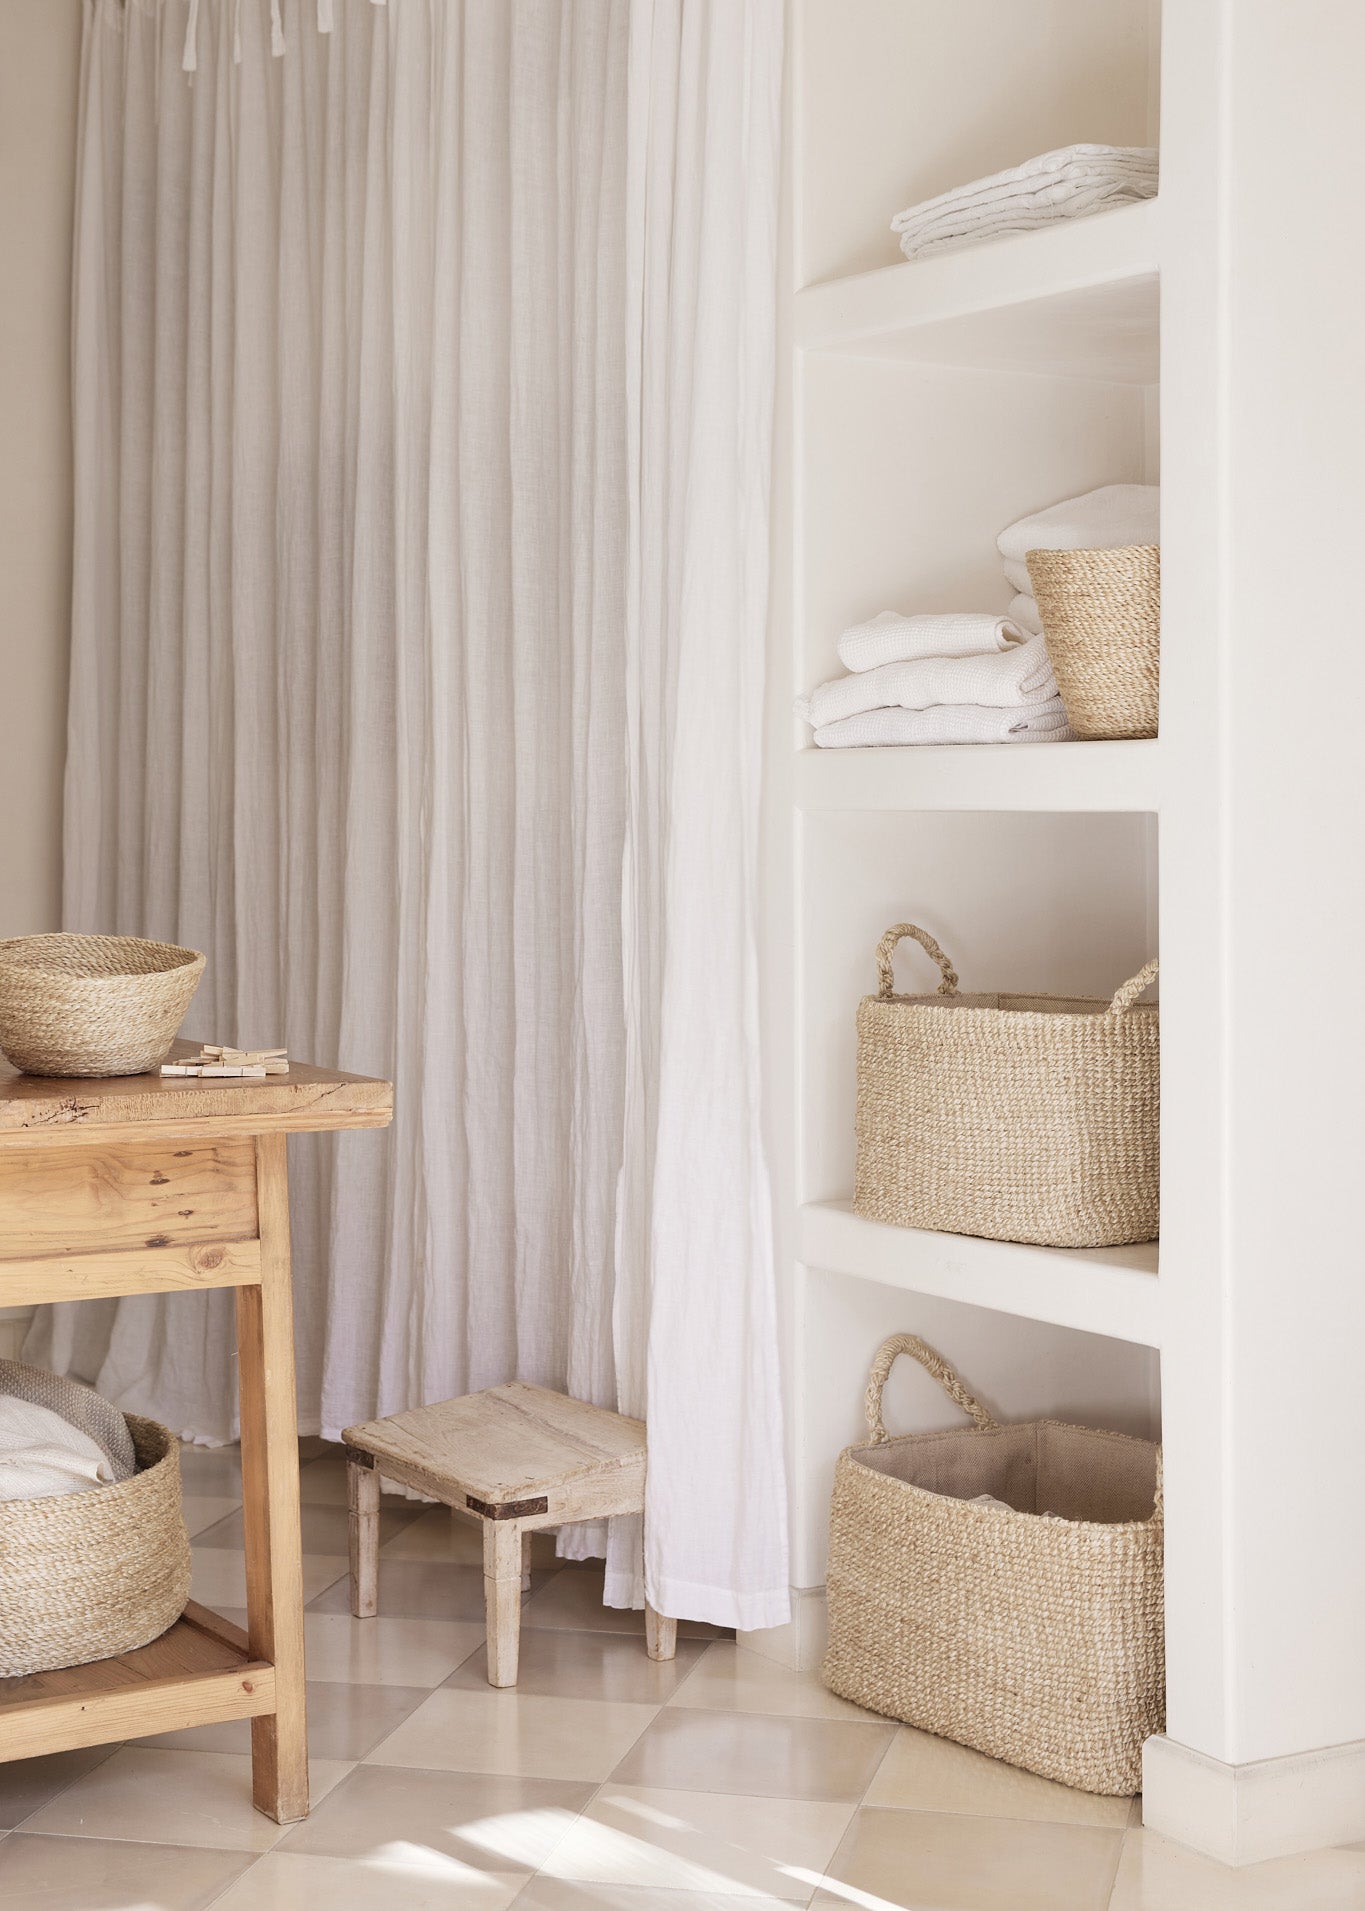 Inspiration | Using Woven Baskets for Storage and Style